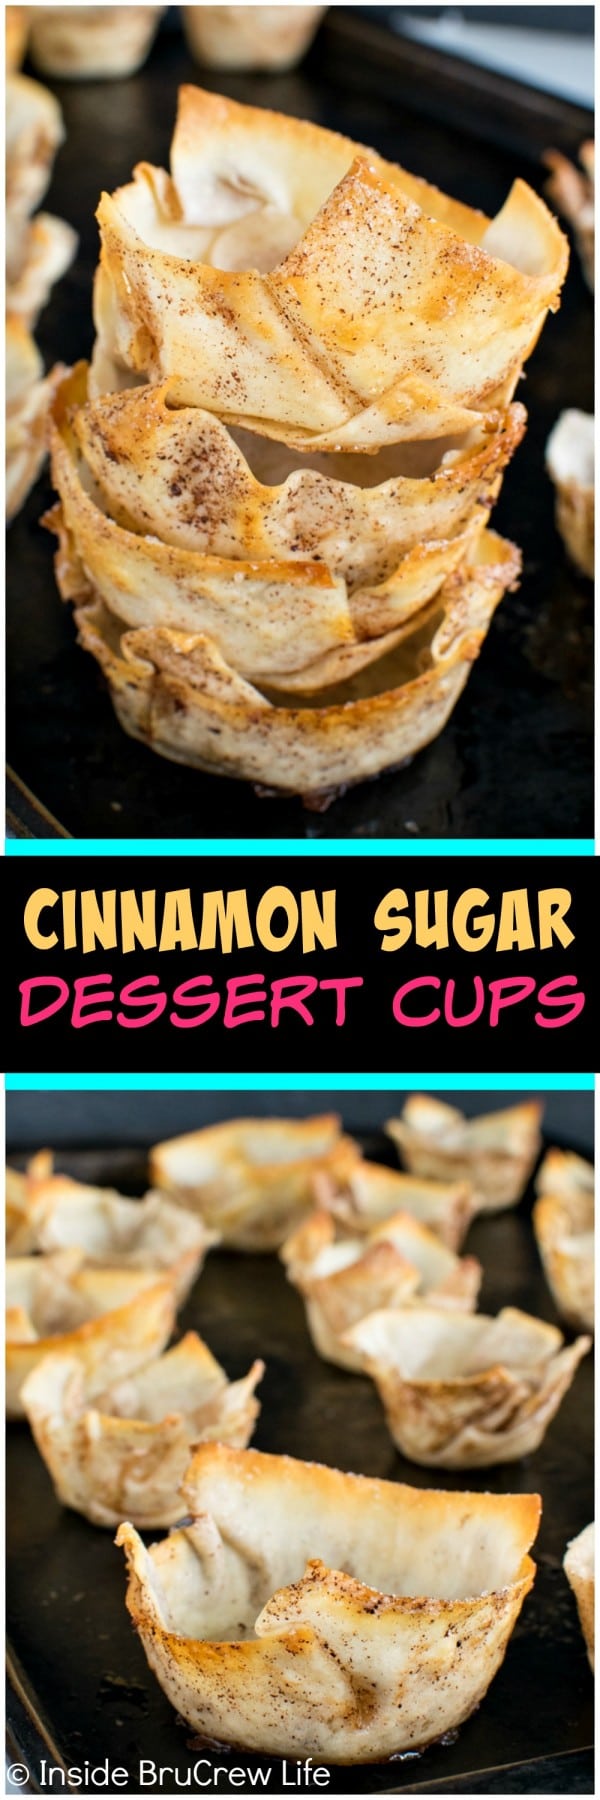 Cinnamon Sugar Dessert Cups - these easy little cups are perfect for filling with cheesecake, fruit, or frozen yogurt. Awesome dessert recipe!